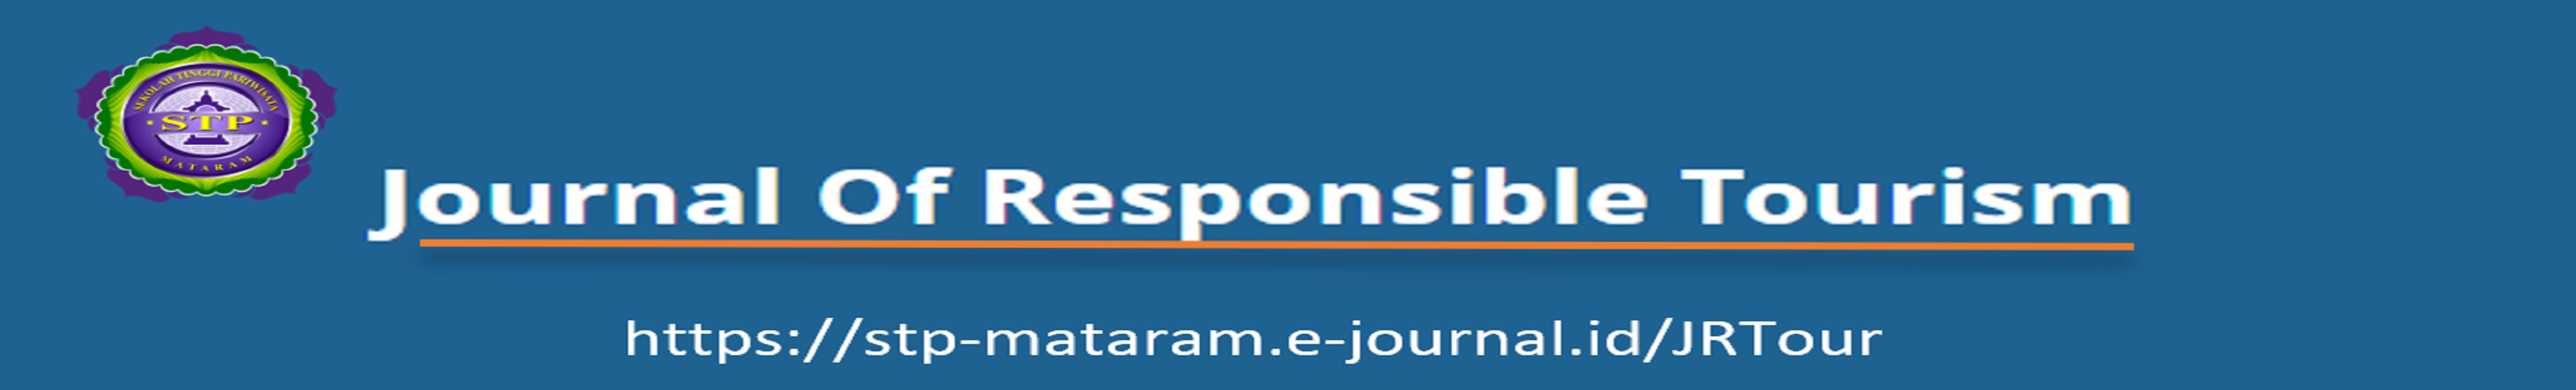 Journal Of Responsible Tourism